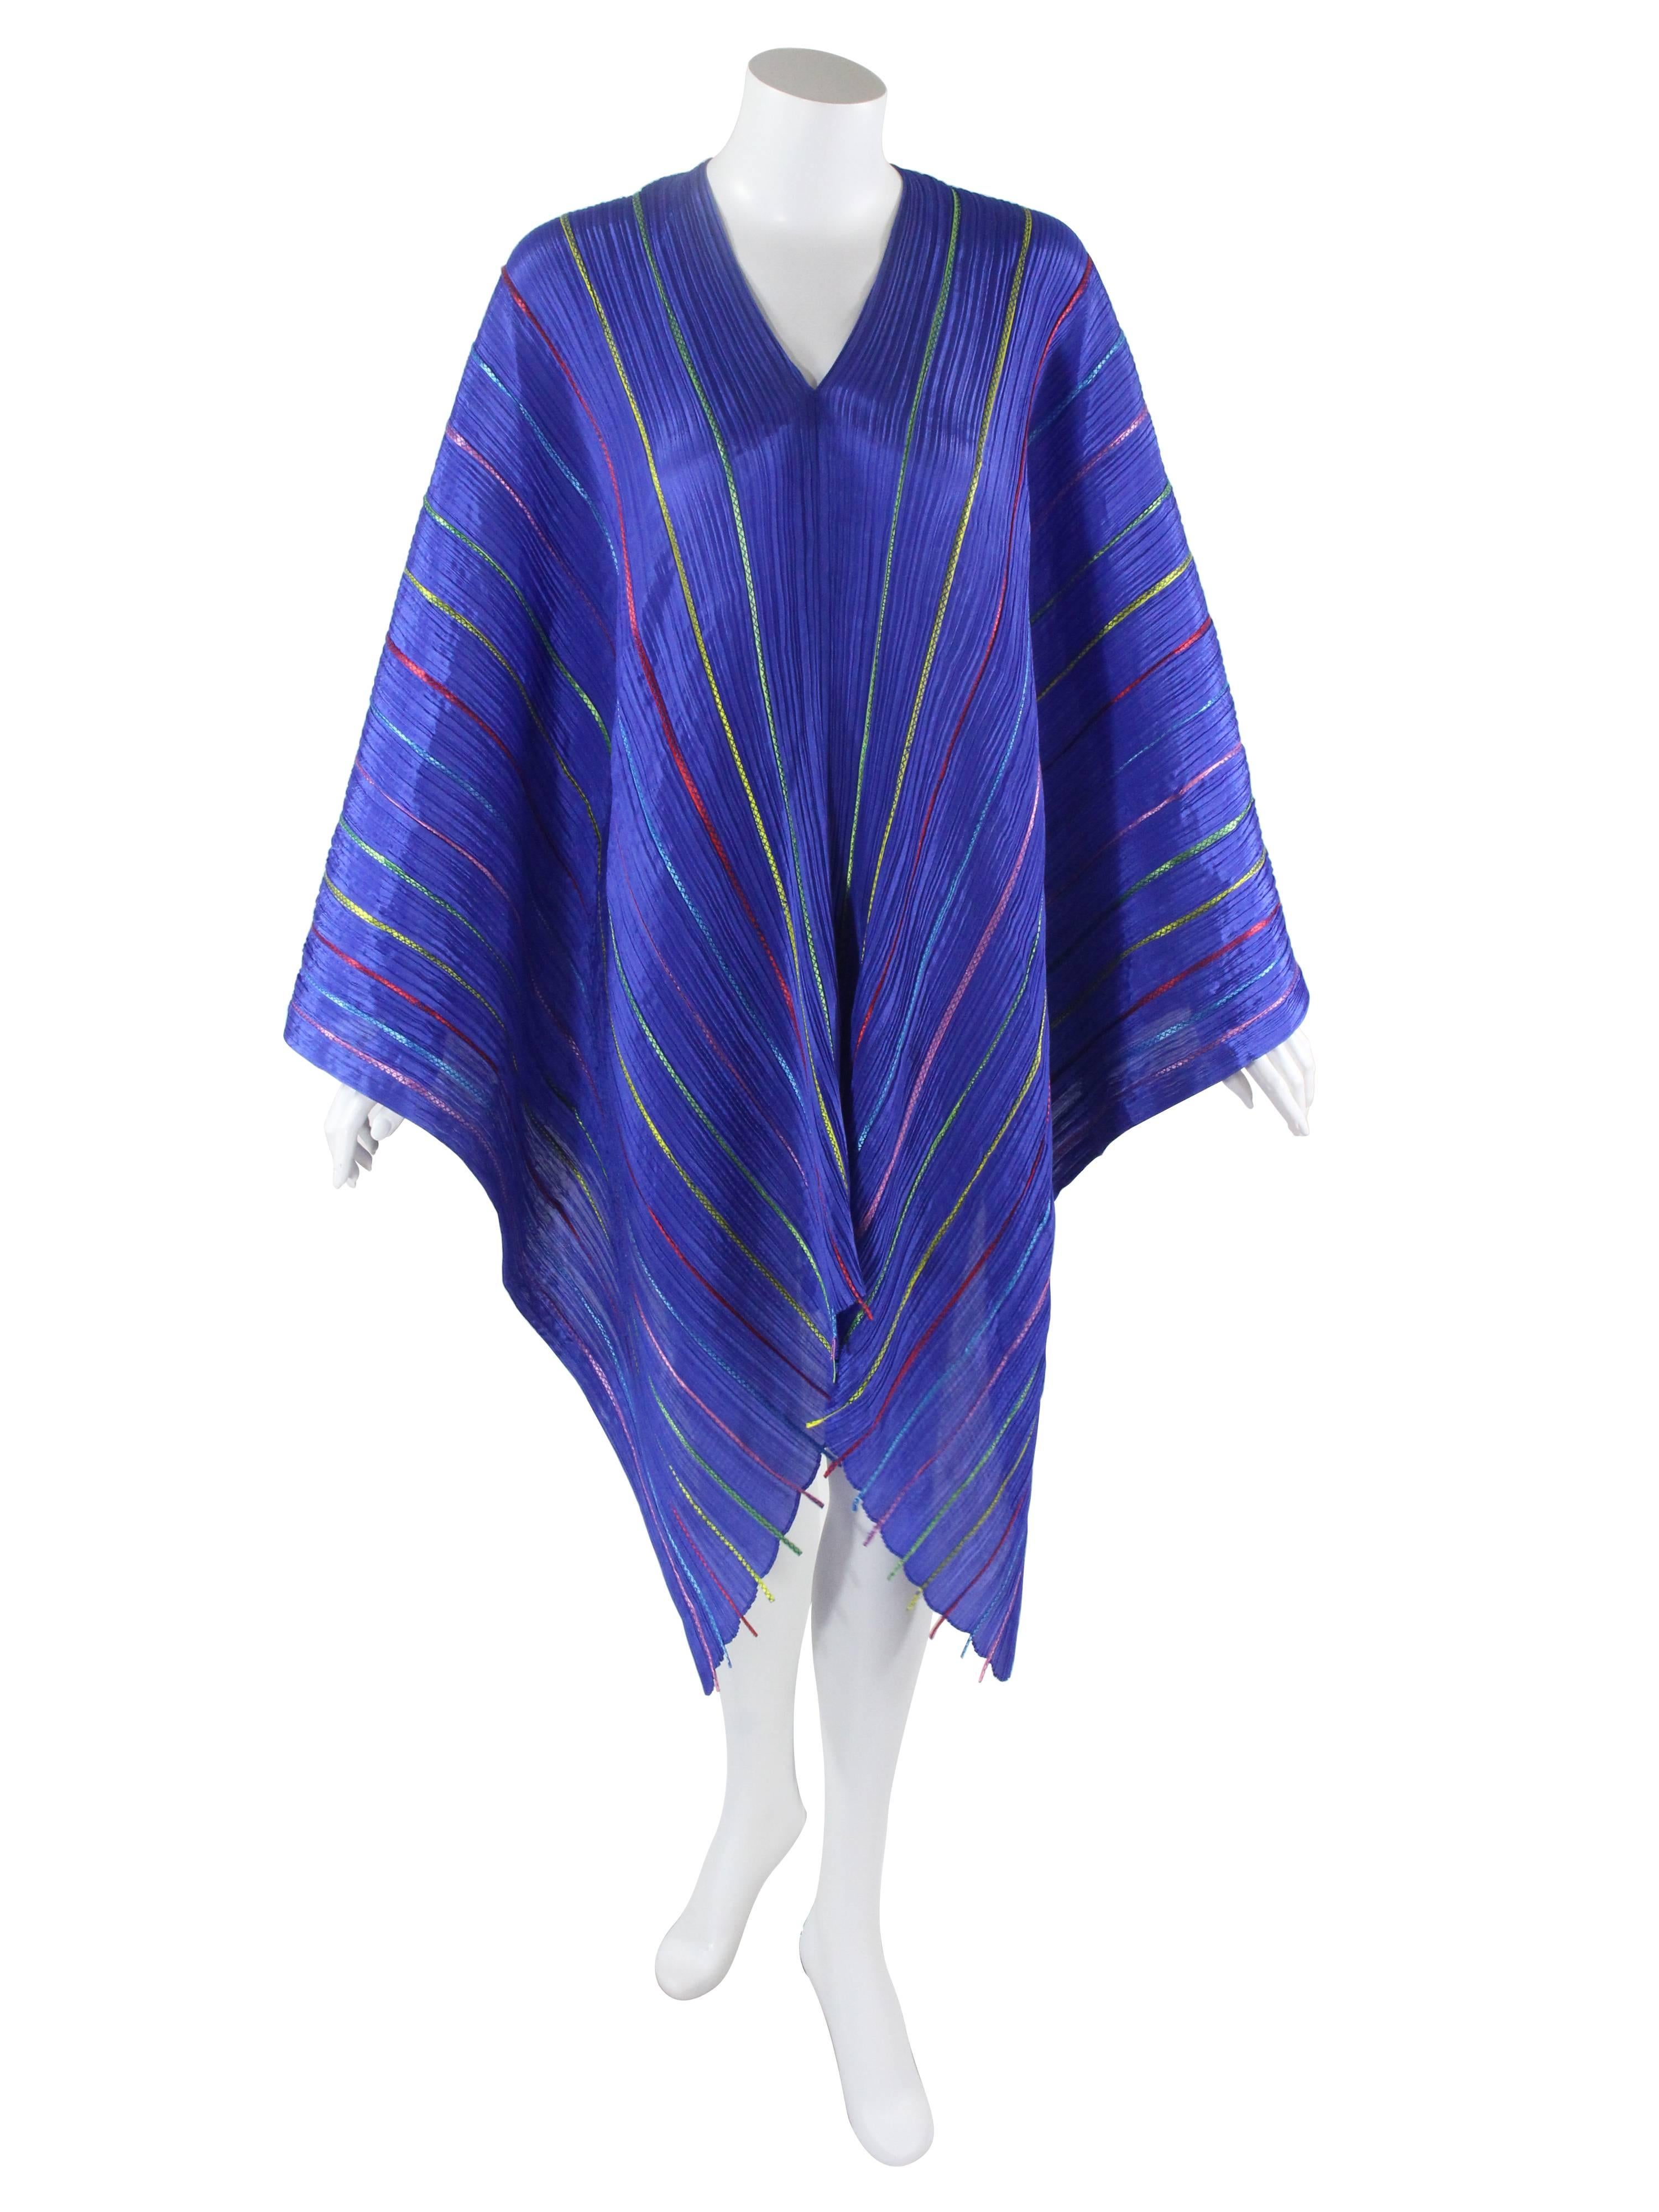 This is an incredible sculptural piece  by Issey Miyake  Pleats Please. Wear it as a cape or dress!  Made of Issey Miyake's signature pleated polyester fabric in royal blue with a rainbow set of ribbon applique. This drapes beautifully on the body,